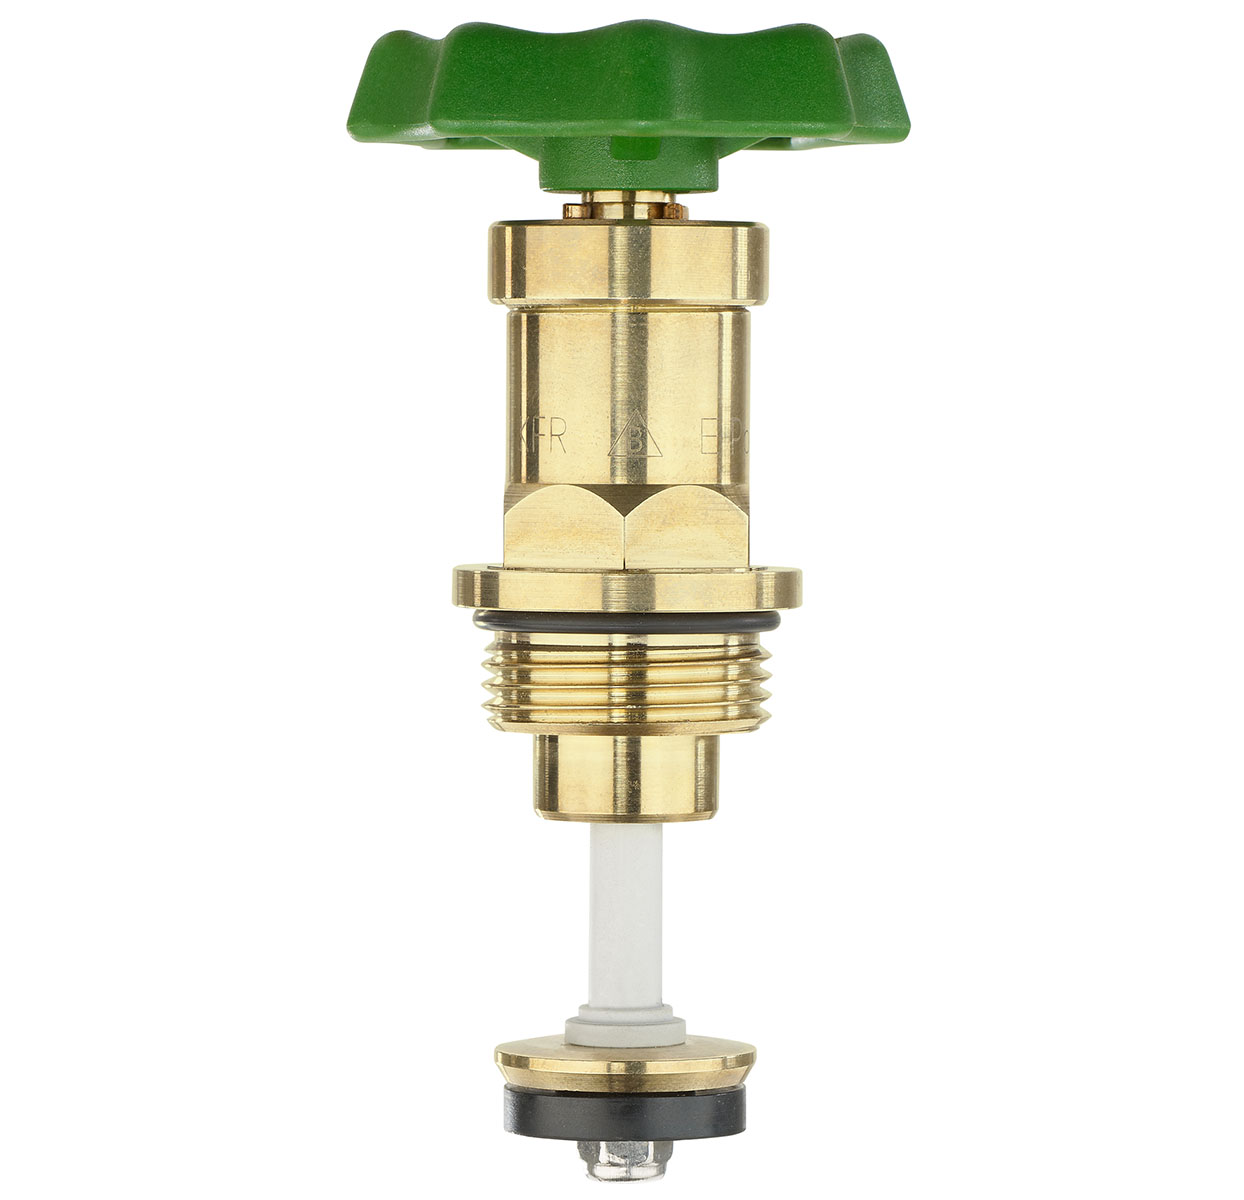 1275400 - Cuphin Upper-part with grease chamber SOFT-drive-system, for Combined Free-flow and Backflow-preventer valves, not-rising spindle